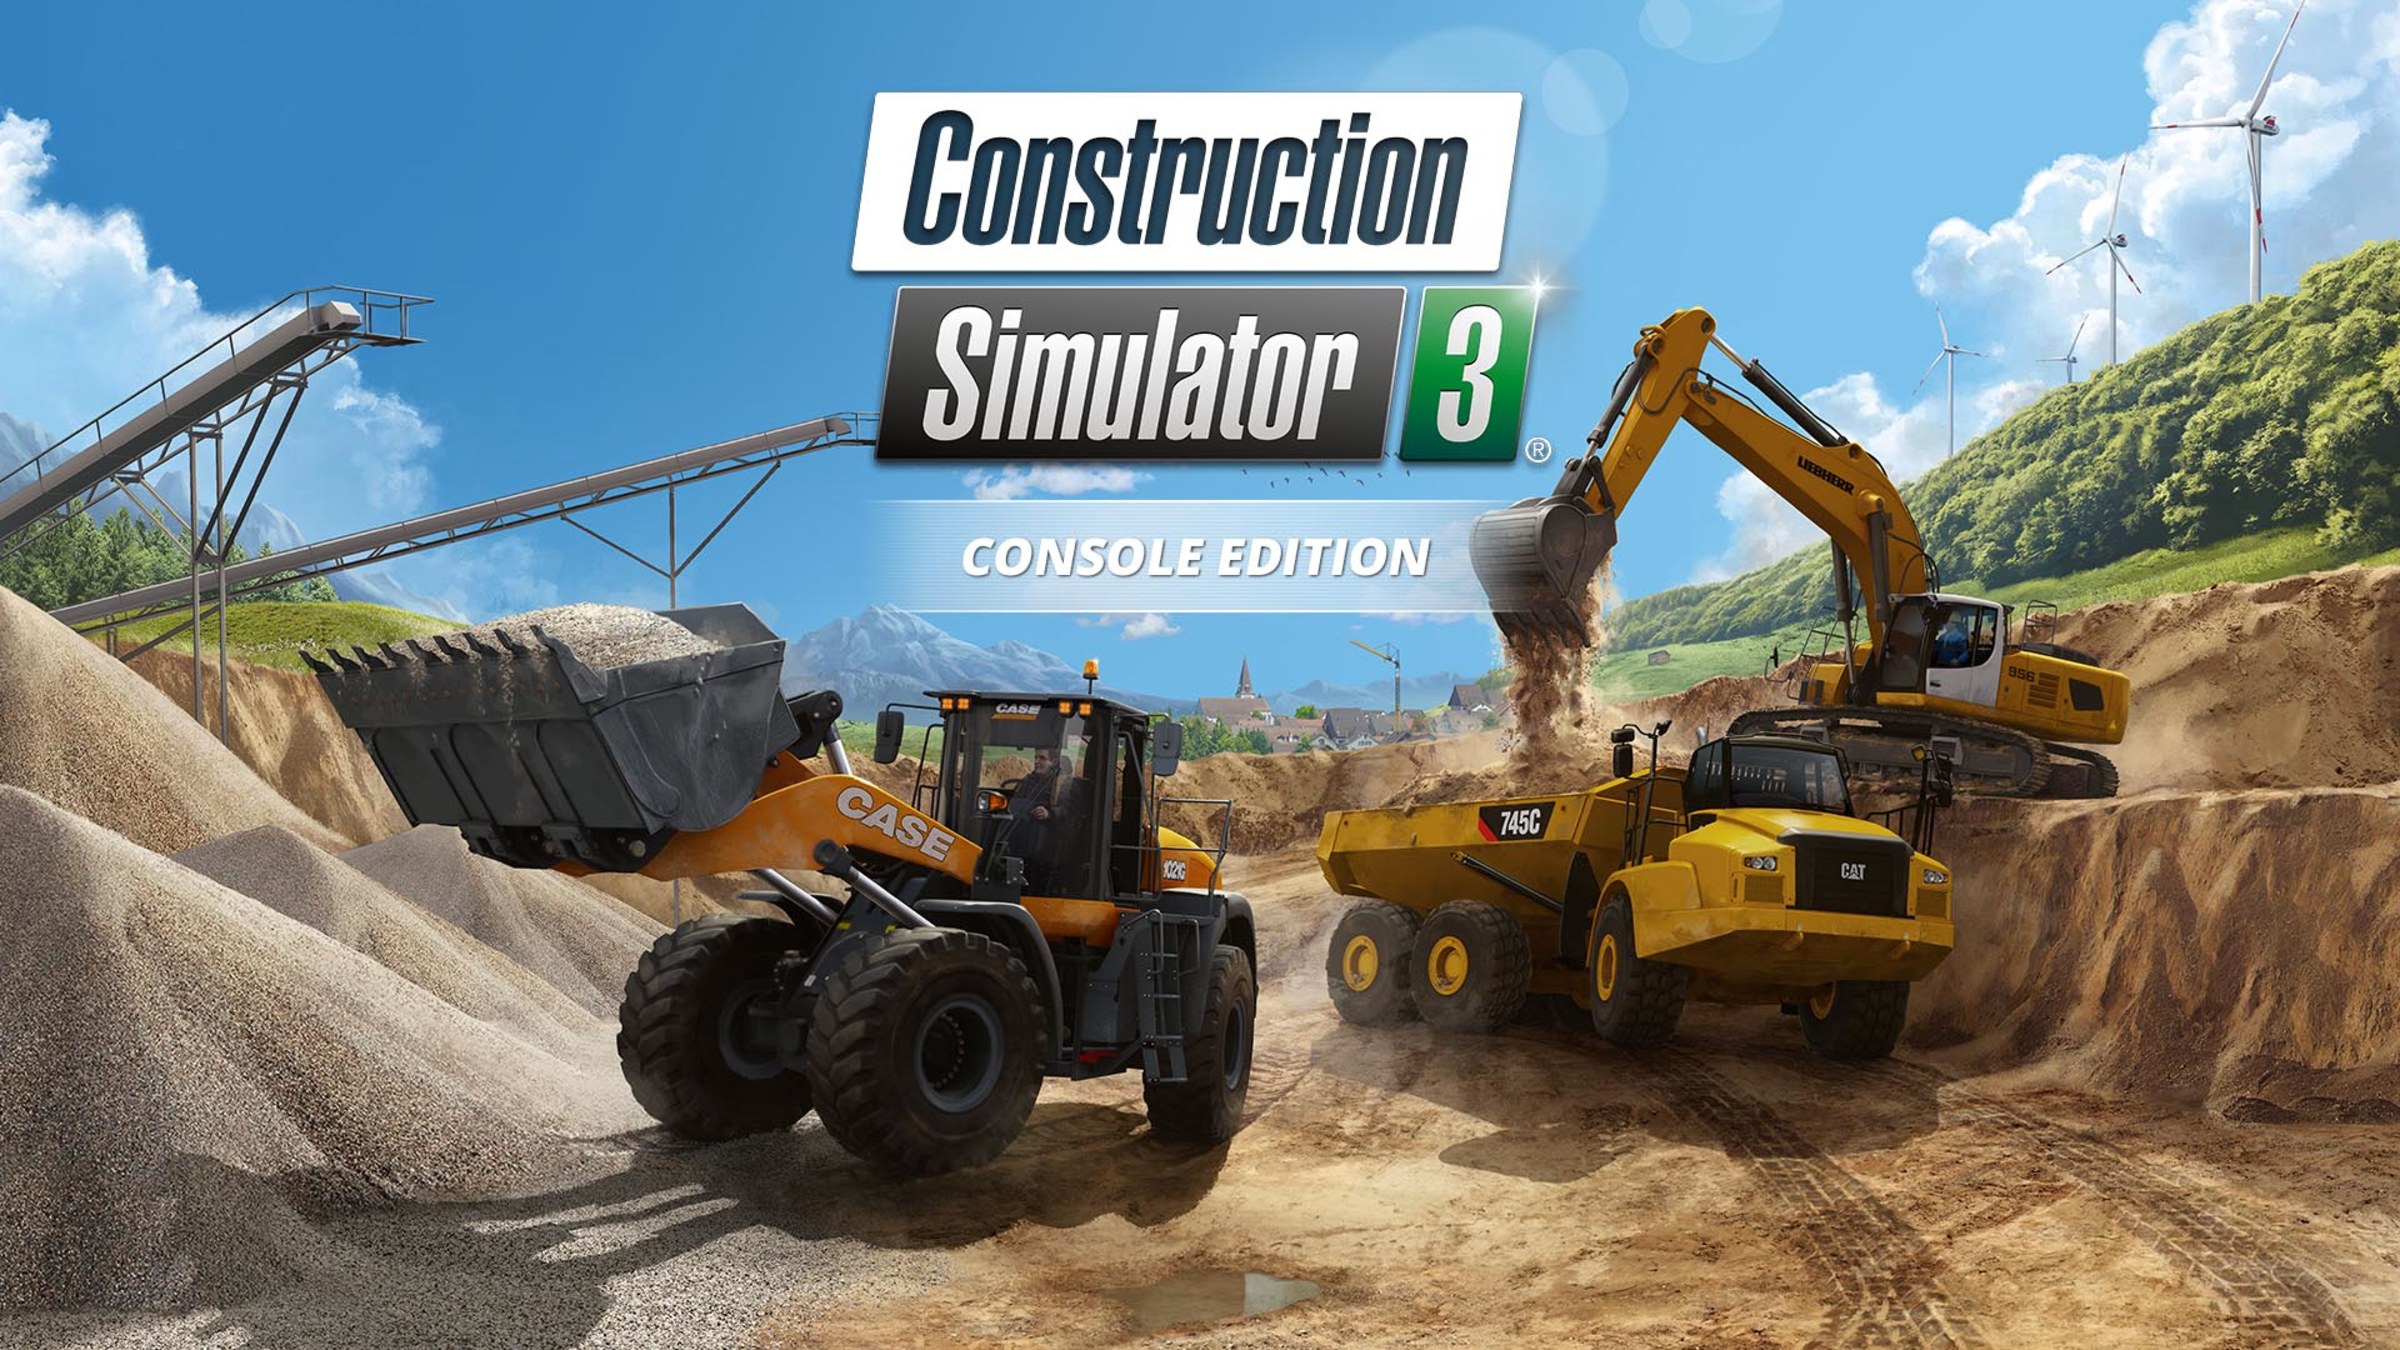 Construction Simulator 3 - Console Edition For Nintendo Switch - Nintendo  Official Site